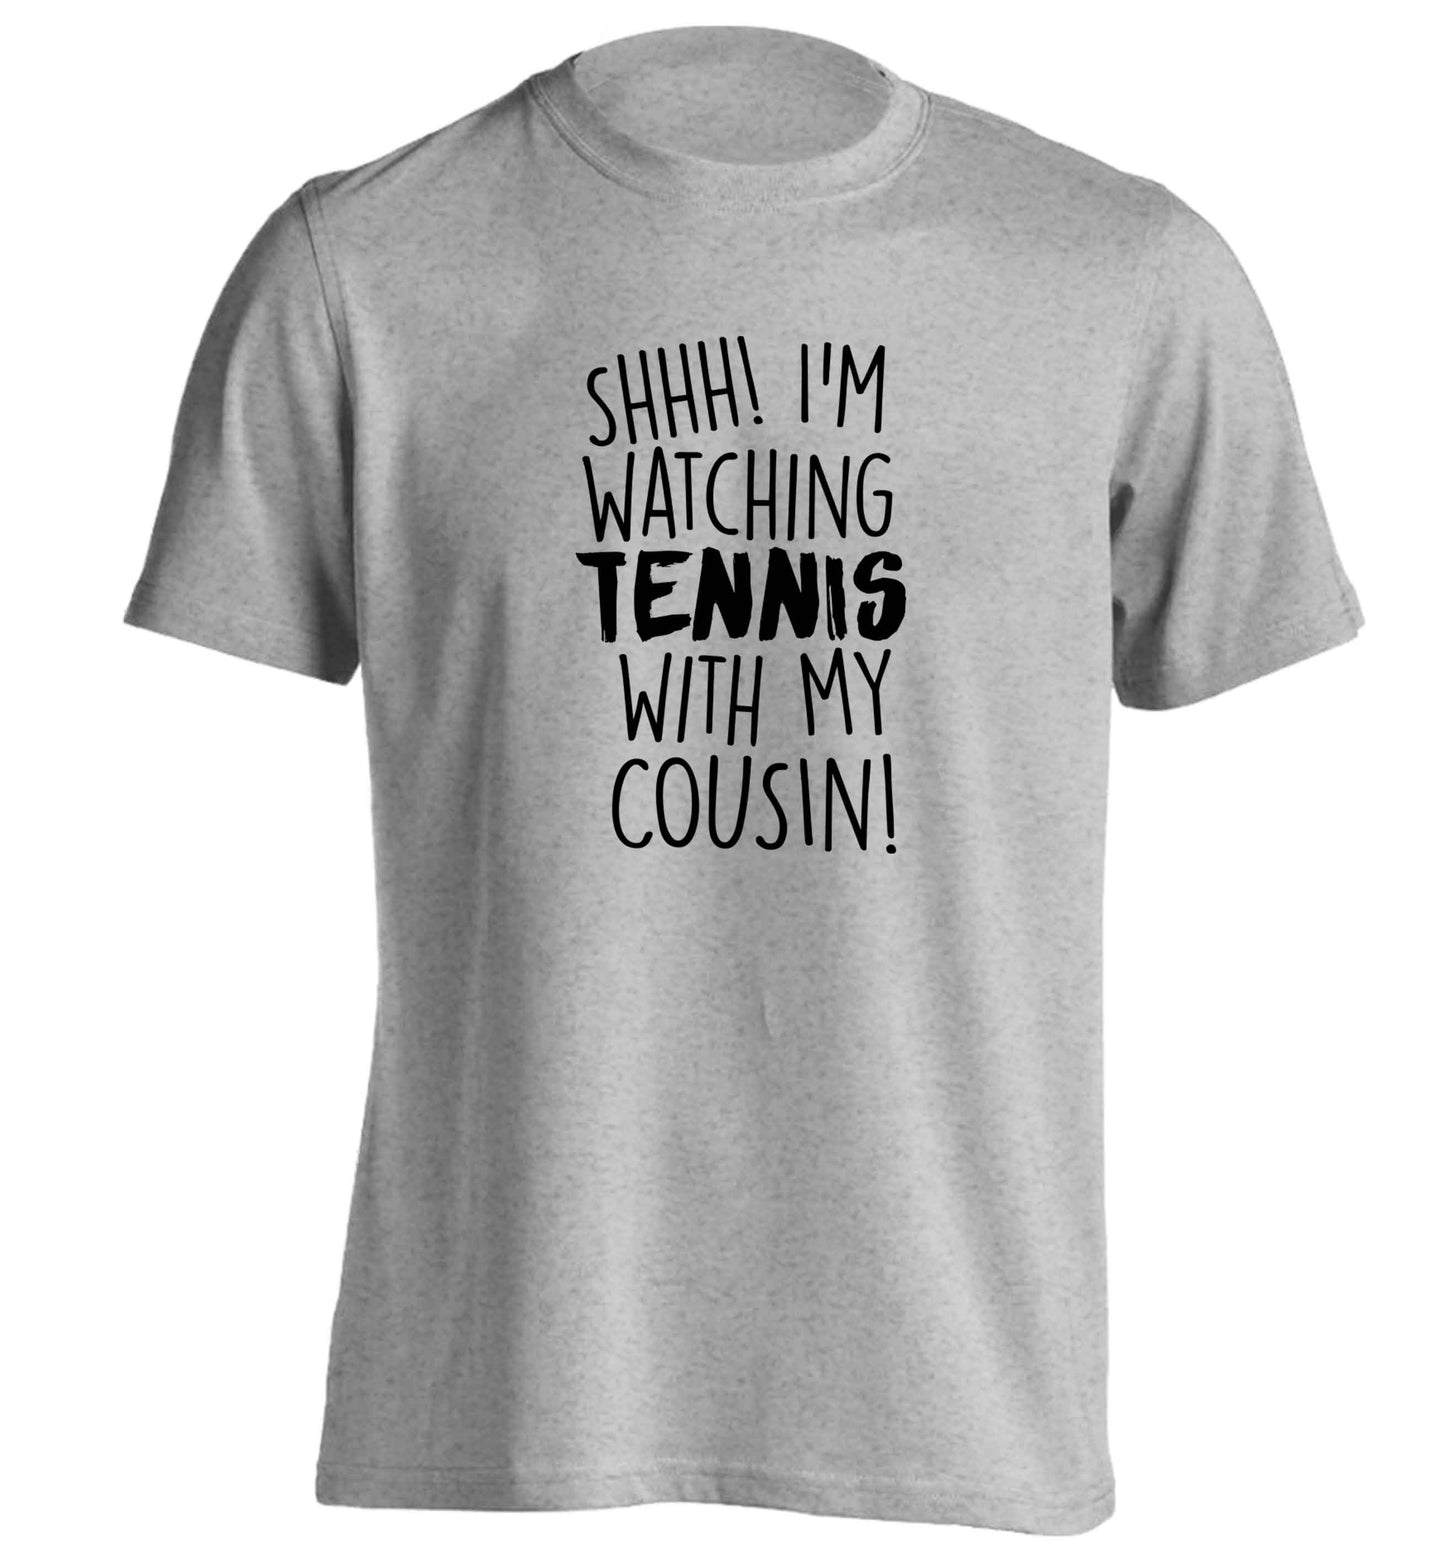 Shh! I'm watching tennis with my cousin! adults unisex grey Tshirt 2XL